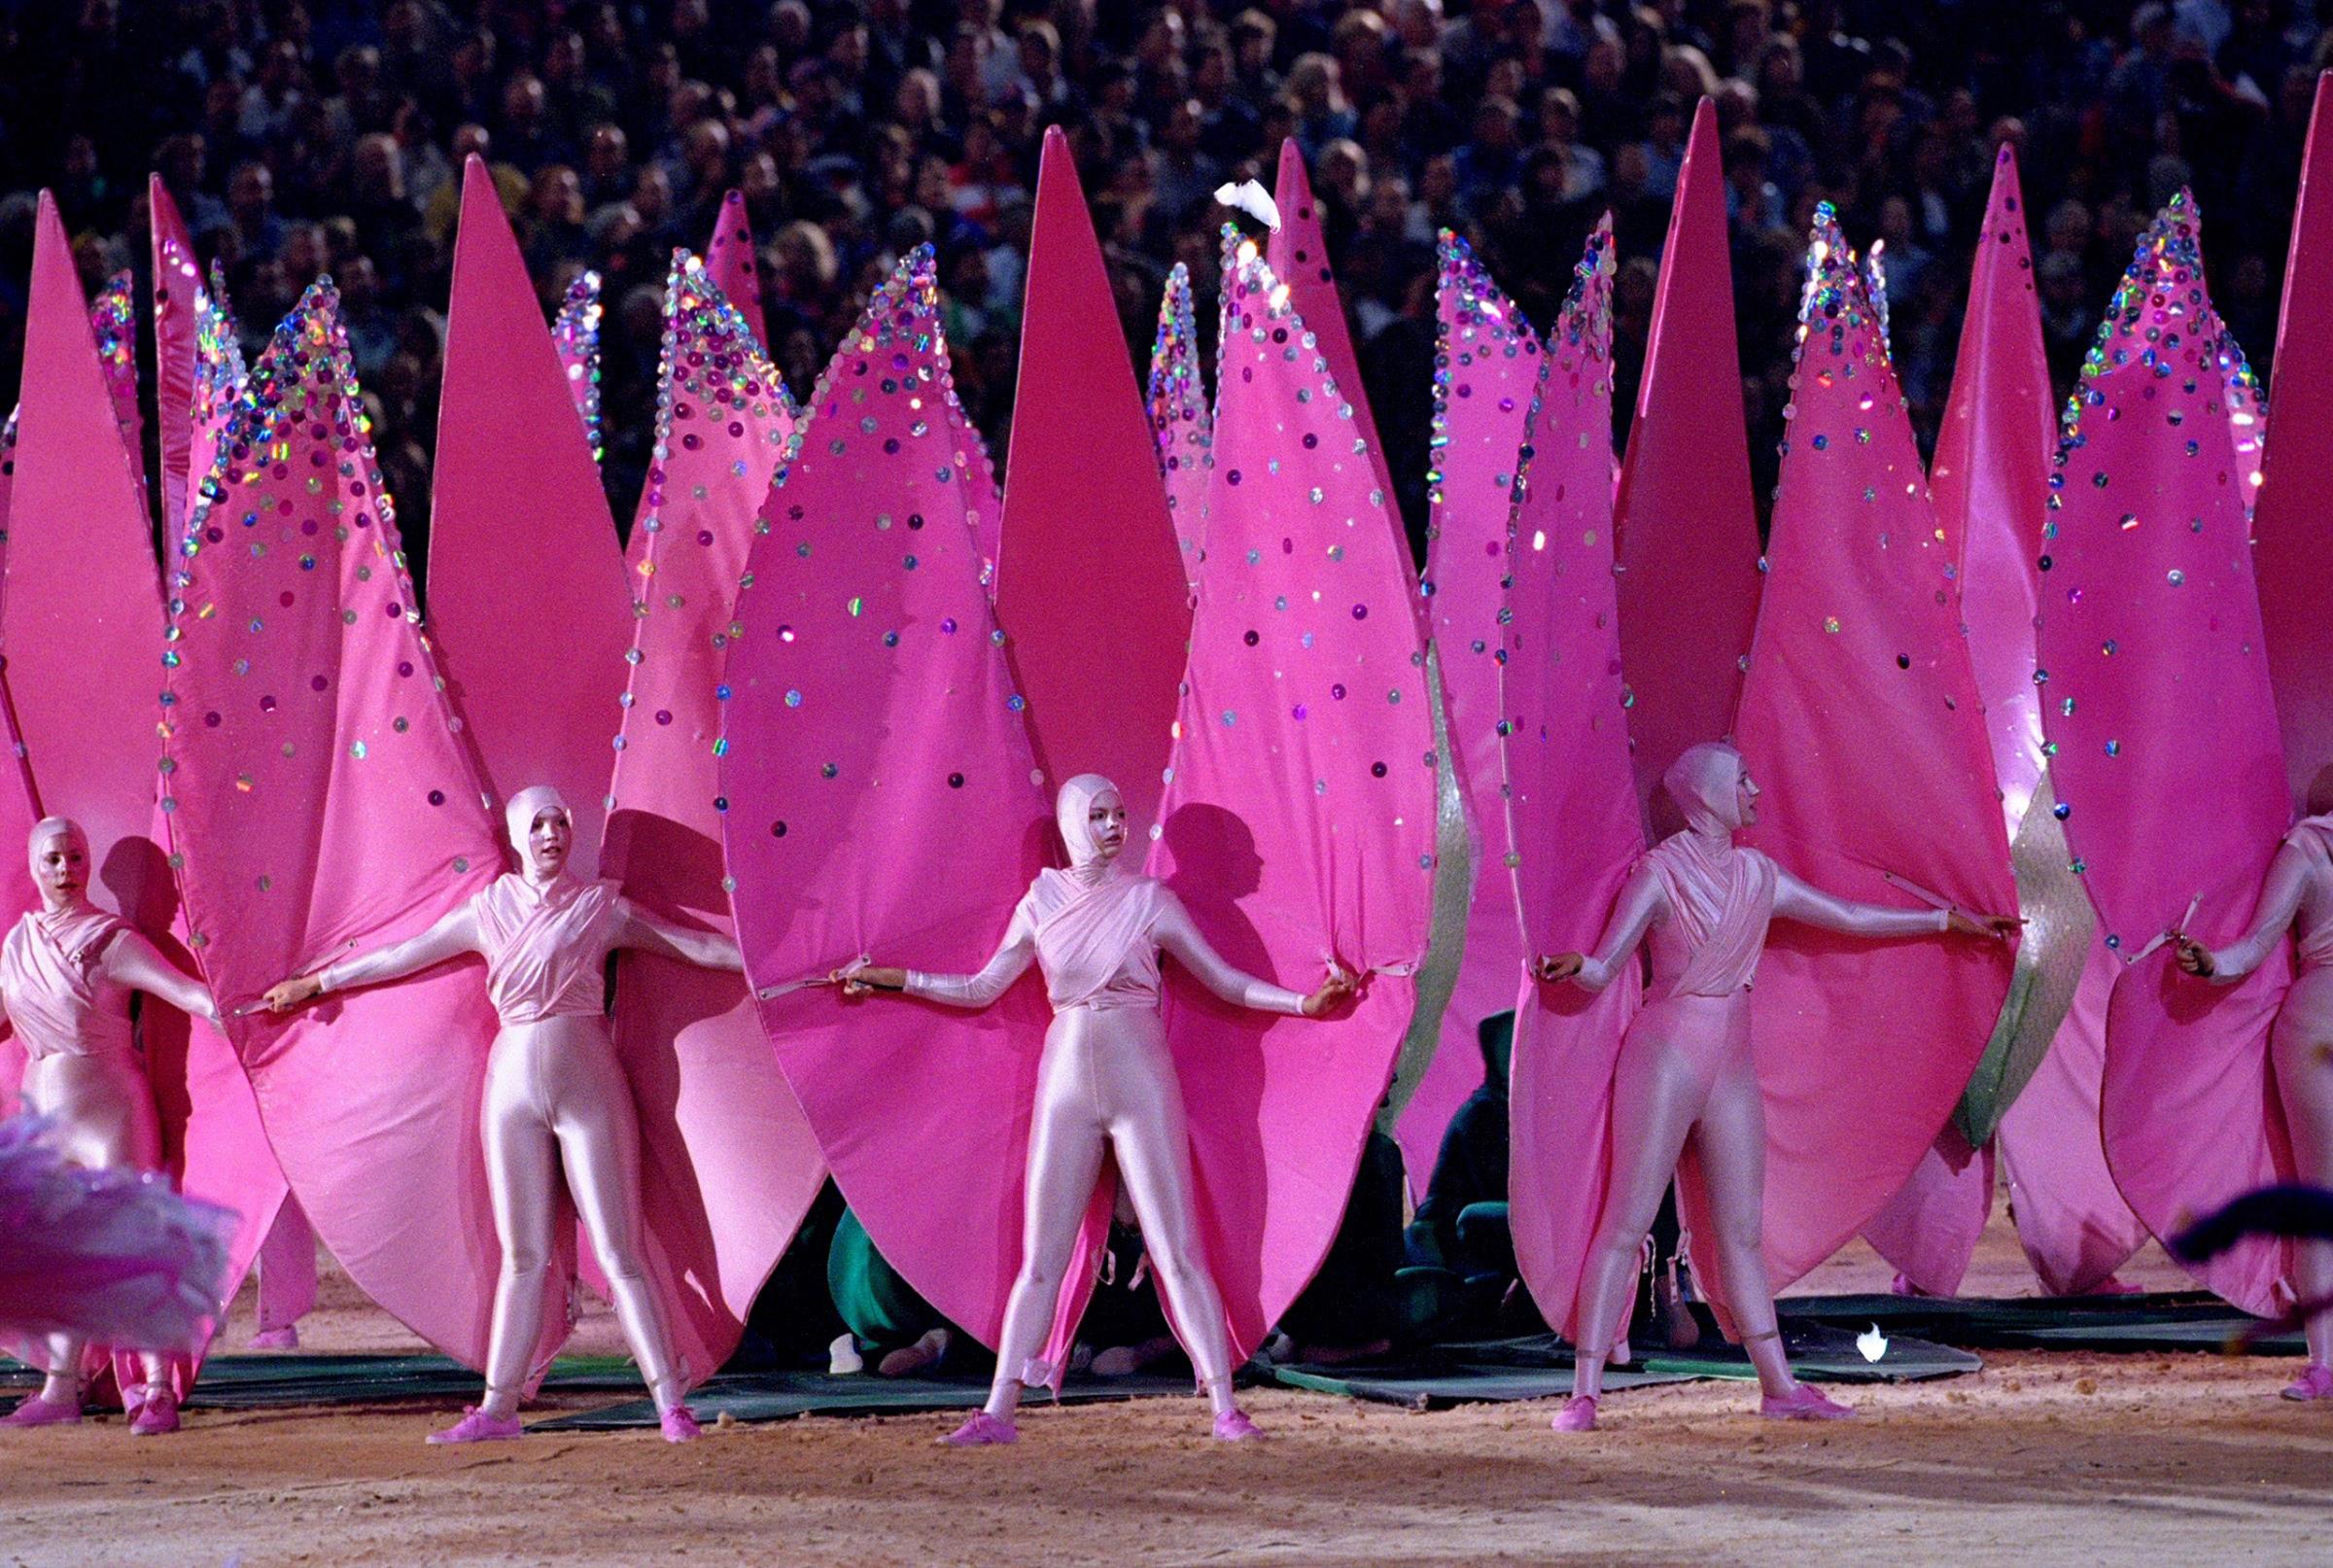 Sydney, 2000Performers dressed as pink petals step into formation to represent some of Australia's indigenous flowers.